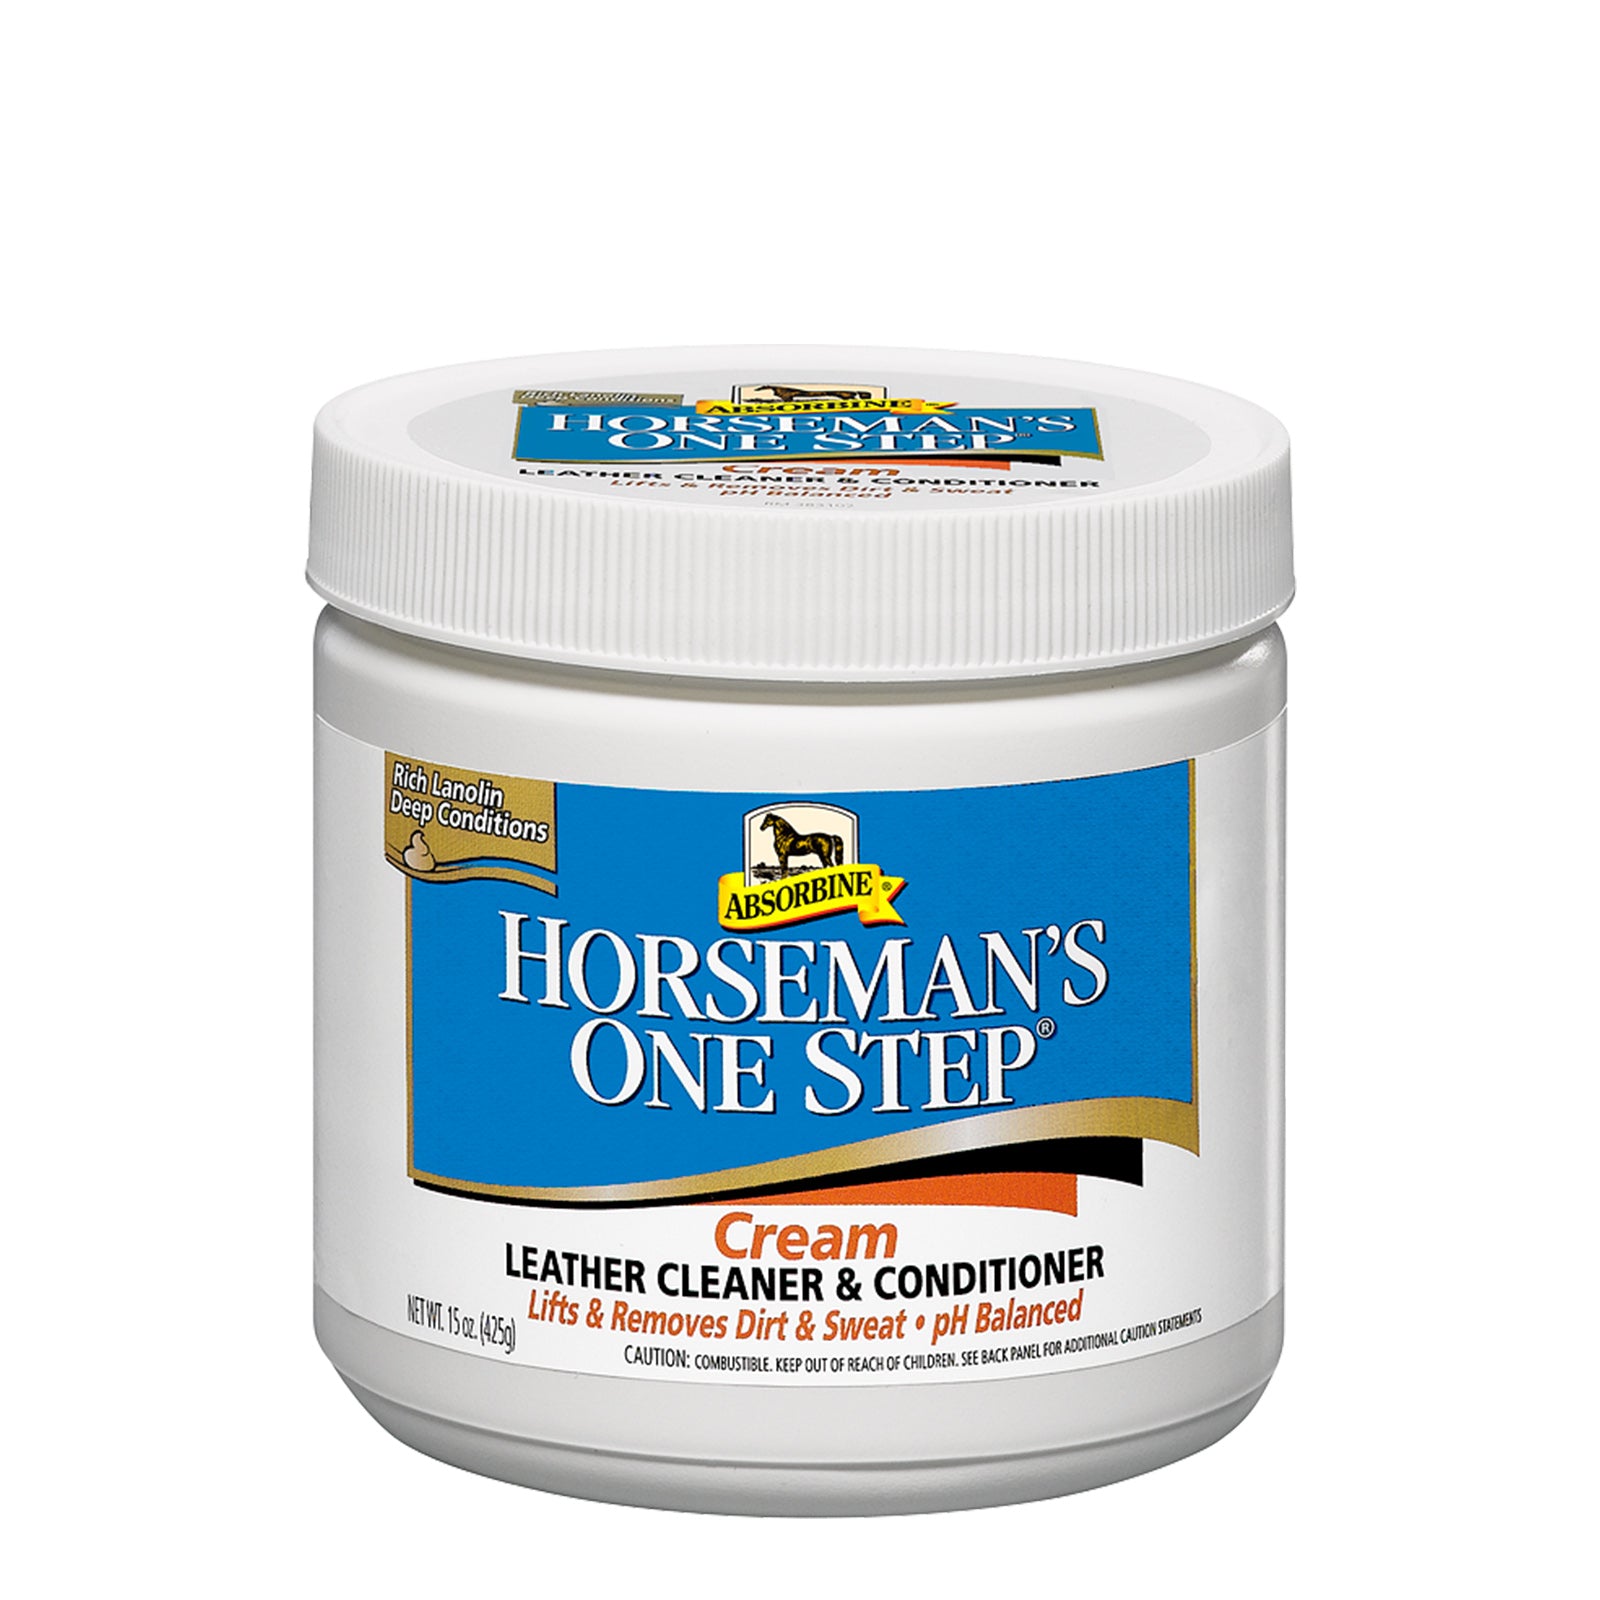 Absorbine Horseman's One Step cream. Leather cleaner & conditioner lifts and removes dirt & sweat pH balanced (rich lanolin deep conditions).